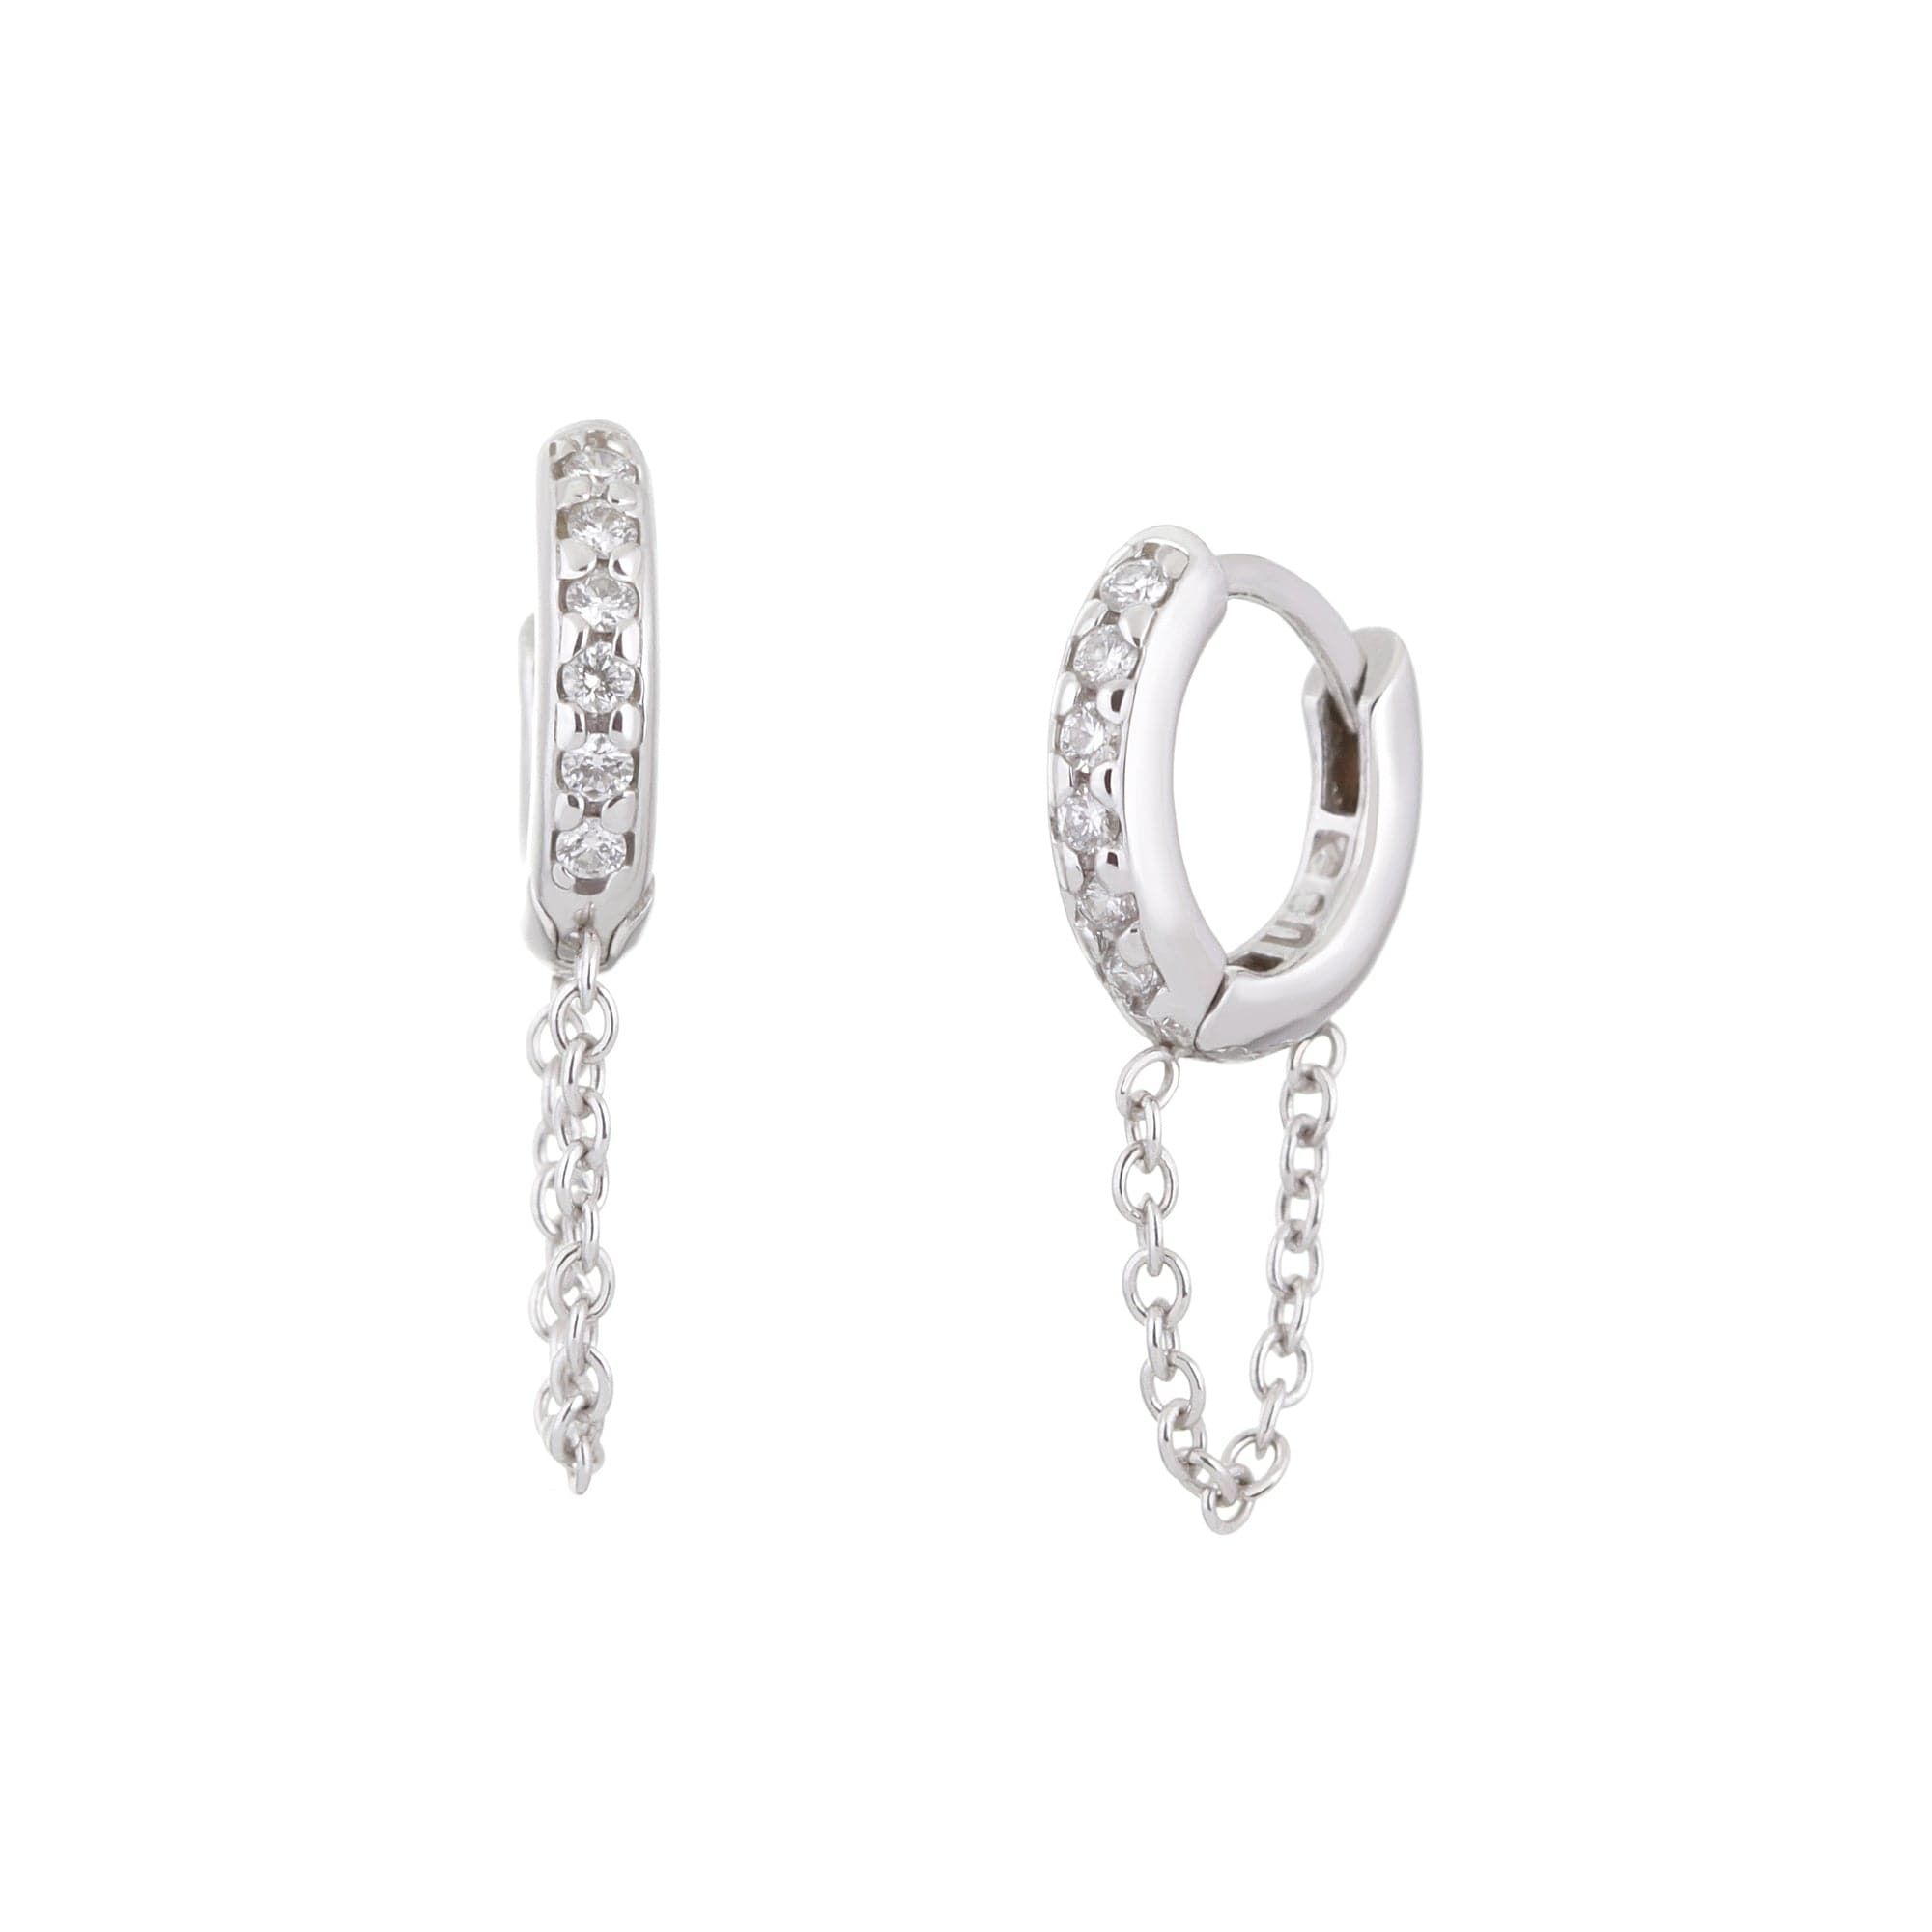 10 mm Diamond and 14K White Gold Huggie Hoops with Chain - eklexic